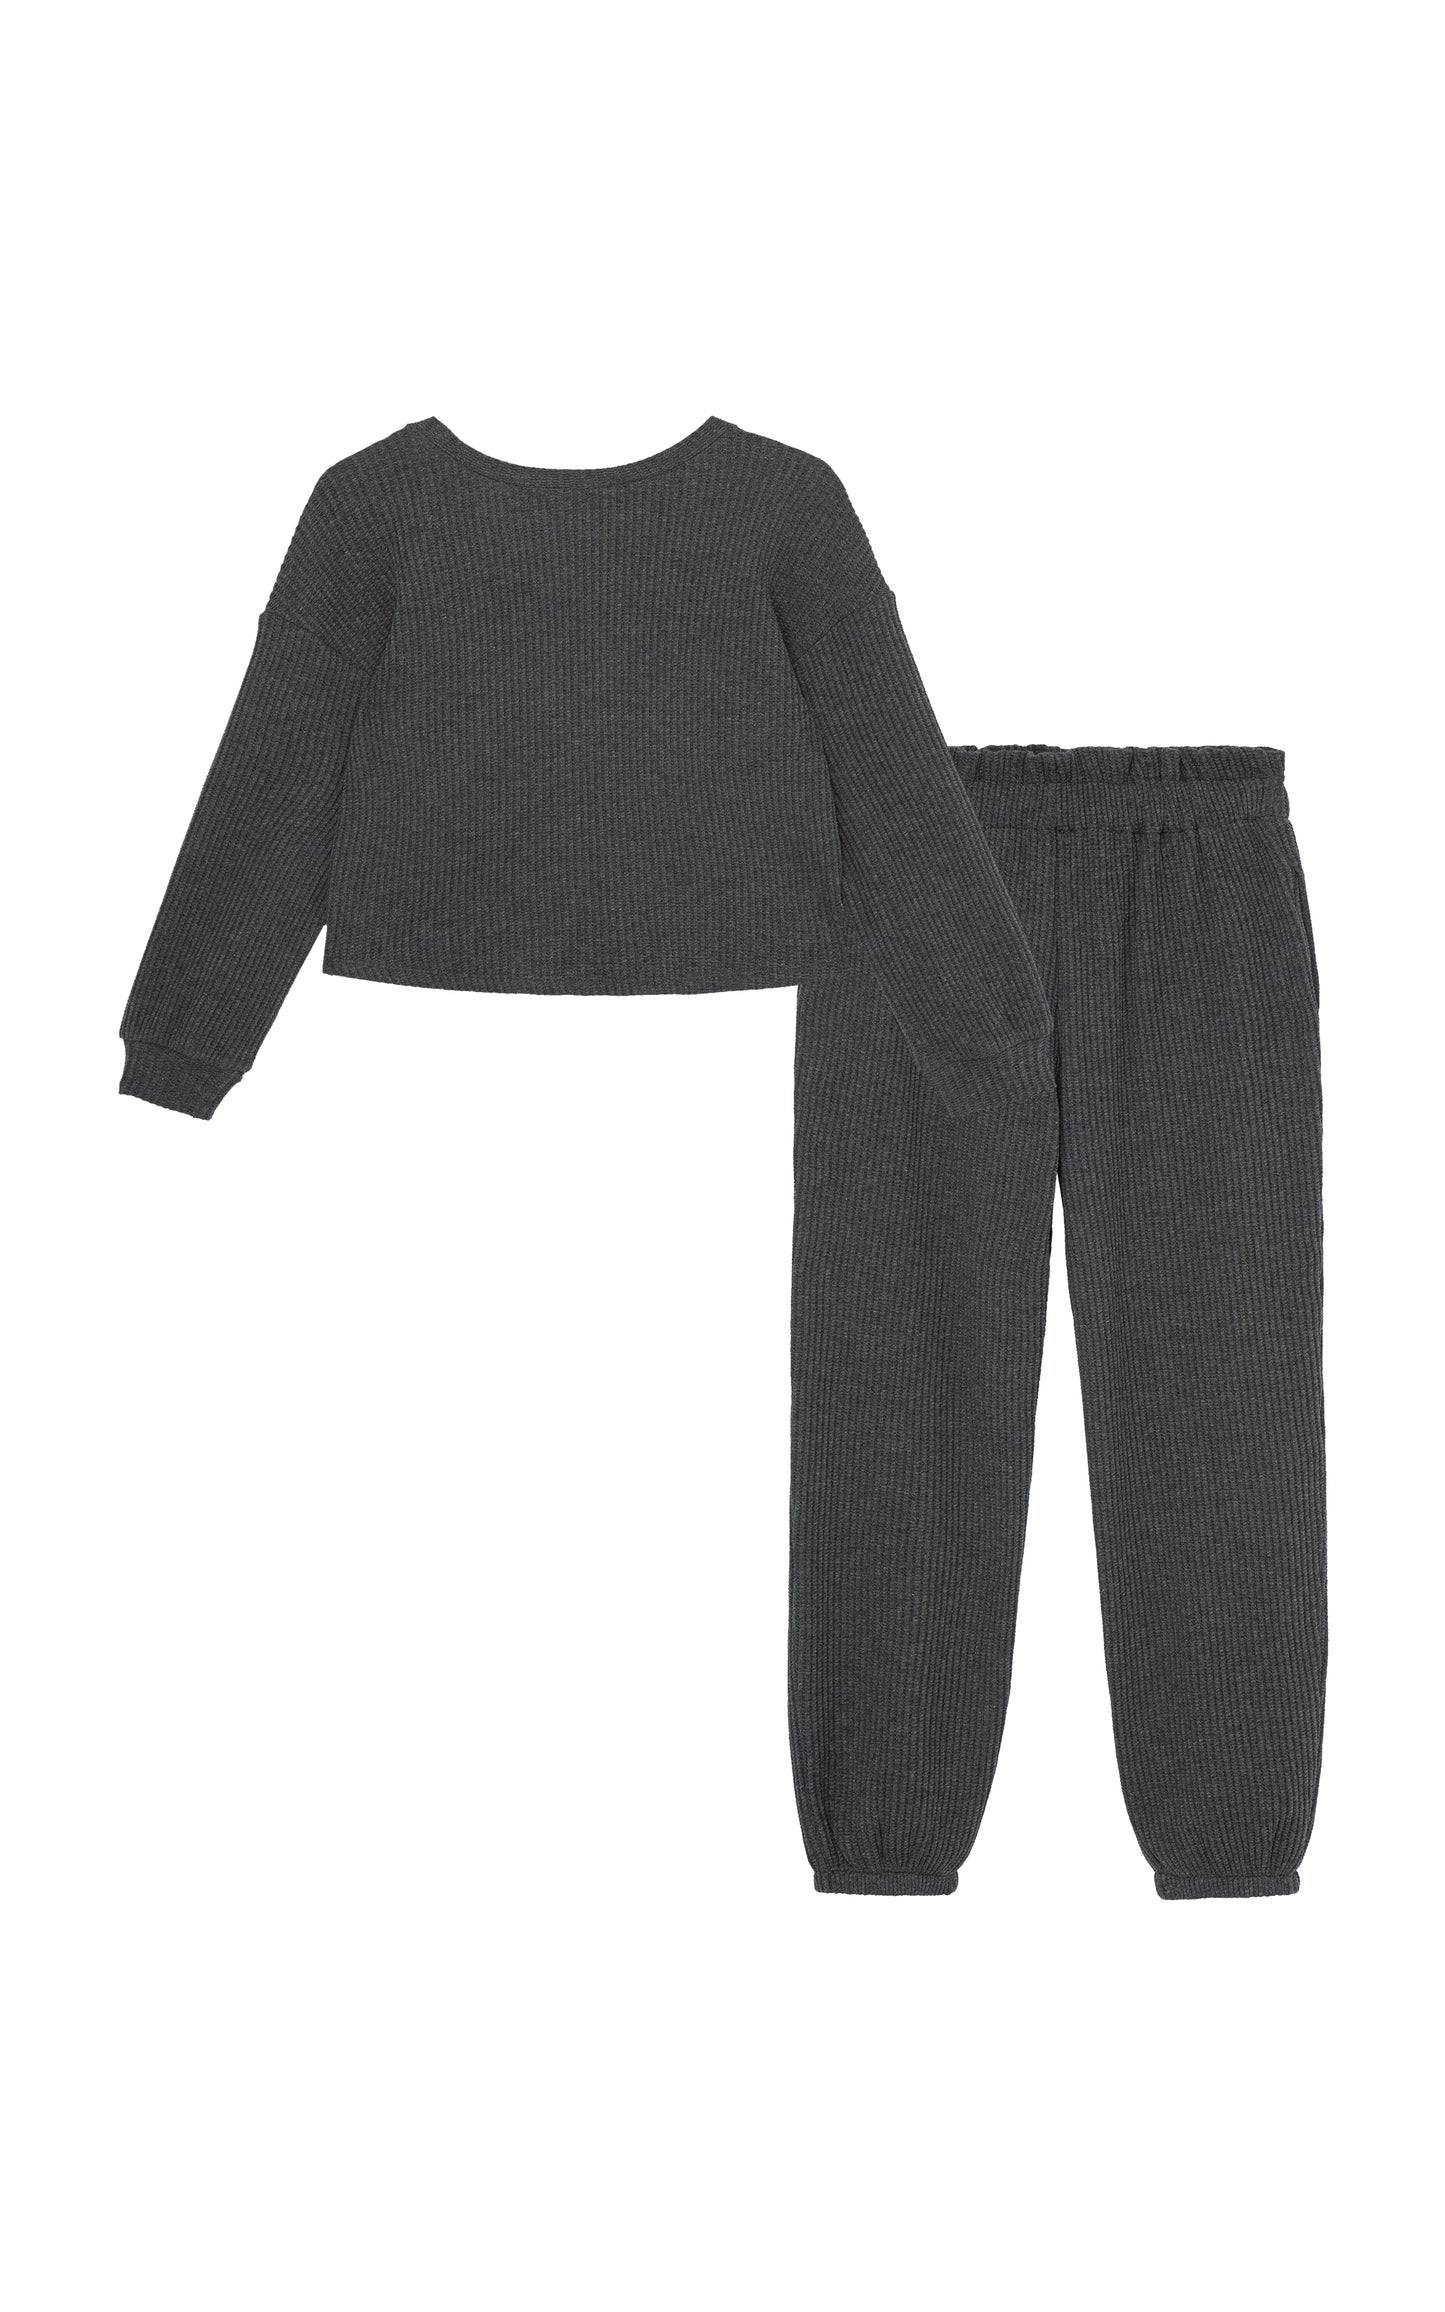 BACK OF DARK GREY  WAFFLE KNIT SWEATER WITH KNOT TWIST IN FRONT AND MATCHING SWEATPANTS